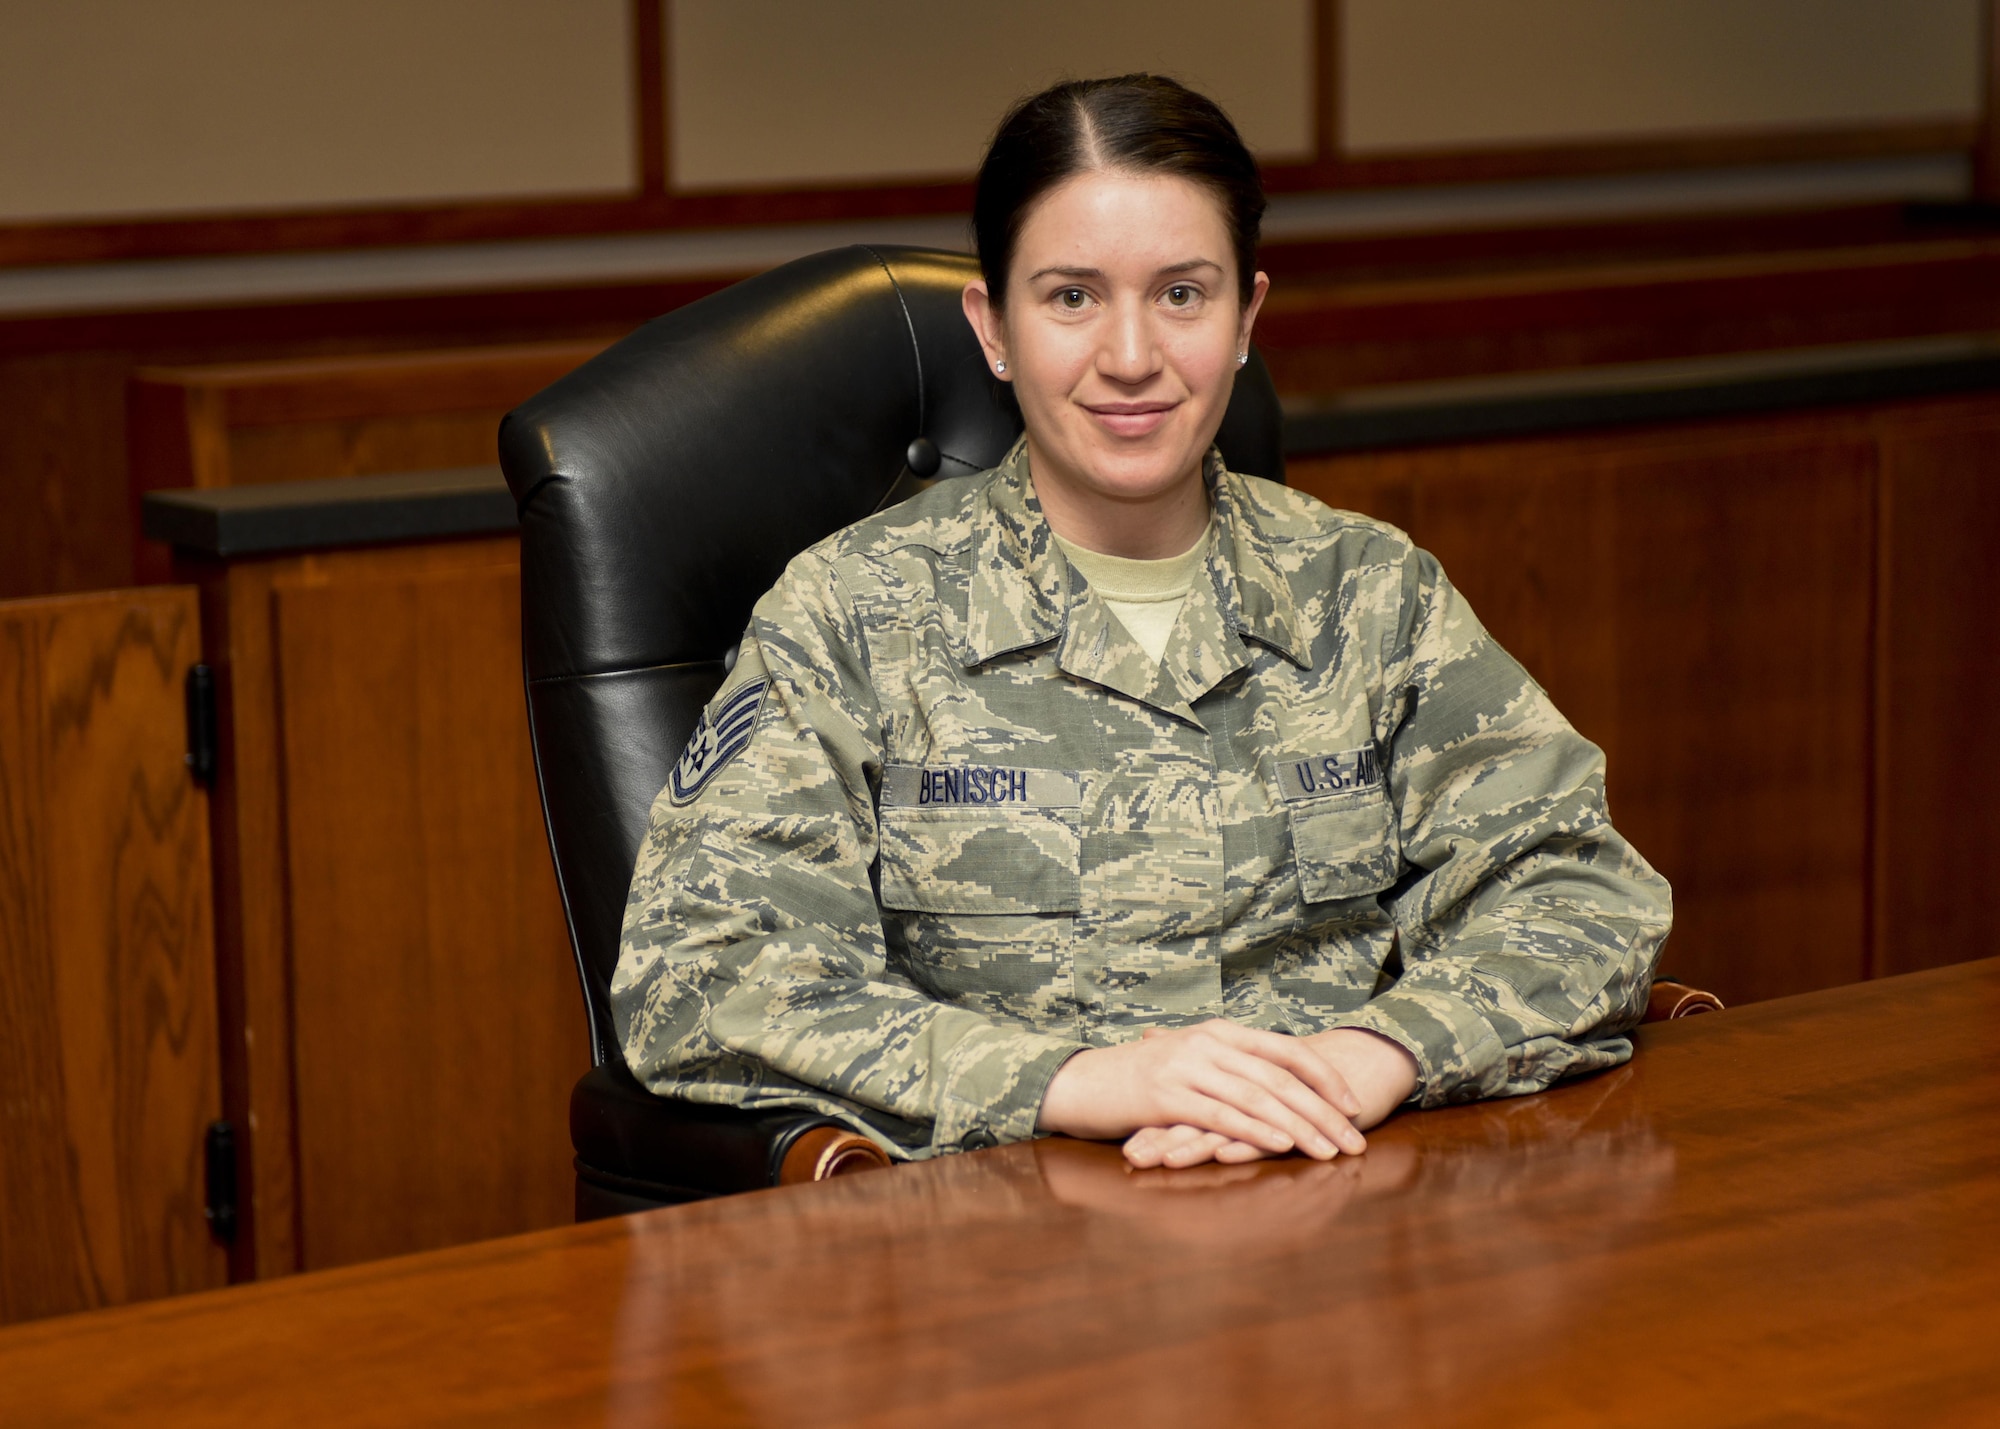 Staff Sgt. Jessica Benisch, a paralegal assigned to the 28th Bomb Wing Legal Office, sits inside the 28th Bomb Wing court room, on Jan. 12, 2017, at Ellsworth Air Force Base, S.D. Benisch was awarded the Castleman Award for 2015, recognizing her as the most outstanding paralegal in Air Force Global Strike Command. (U.S. Air Force photo by Airman 1st Class Randahl J. Jenson)